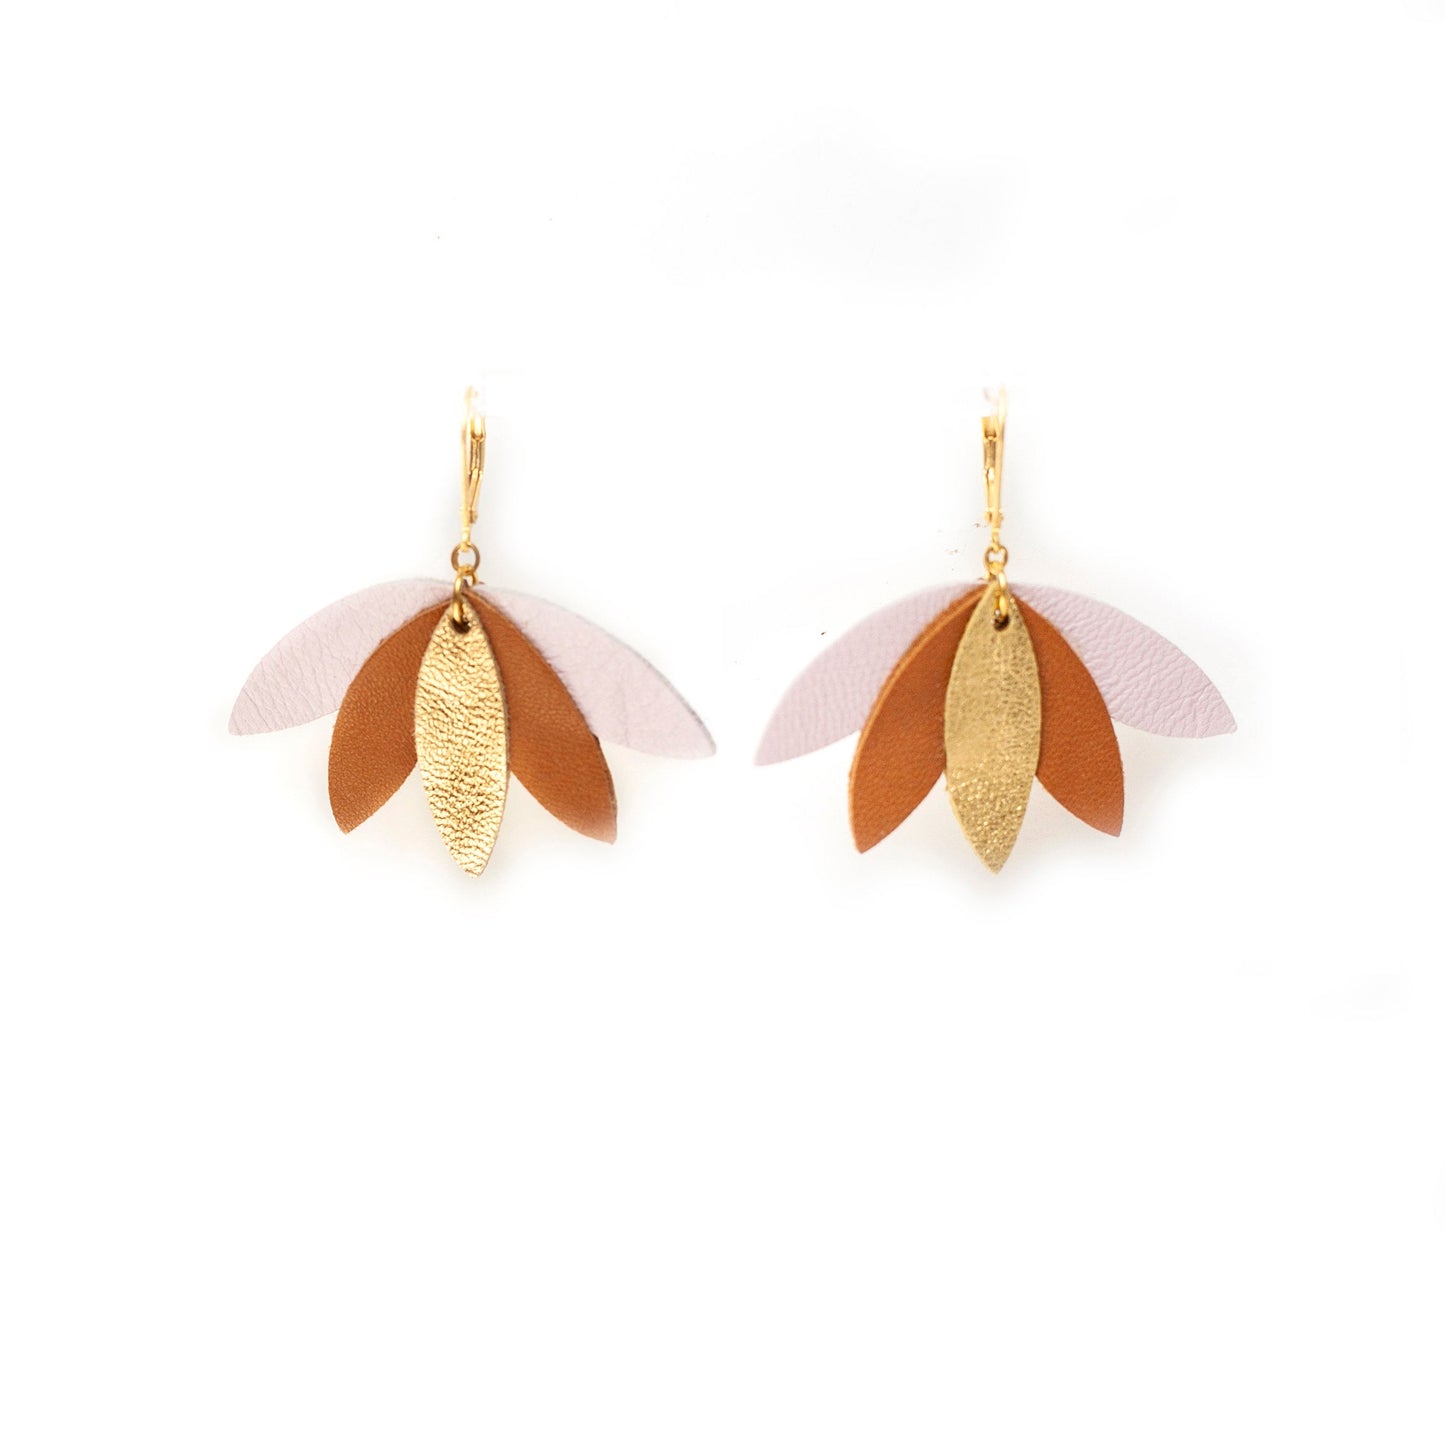 Palm tree earrings gold brown pink leather